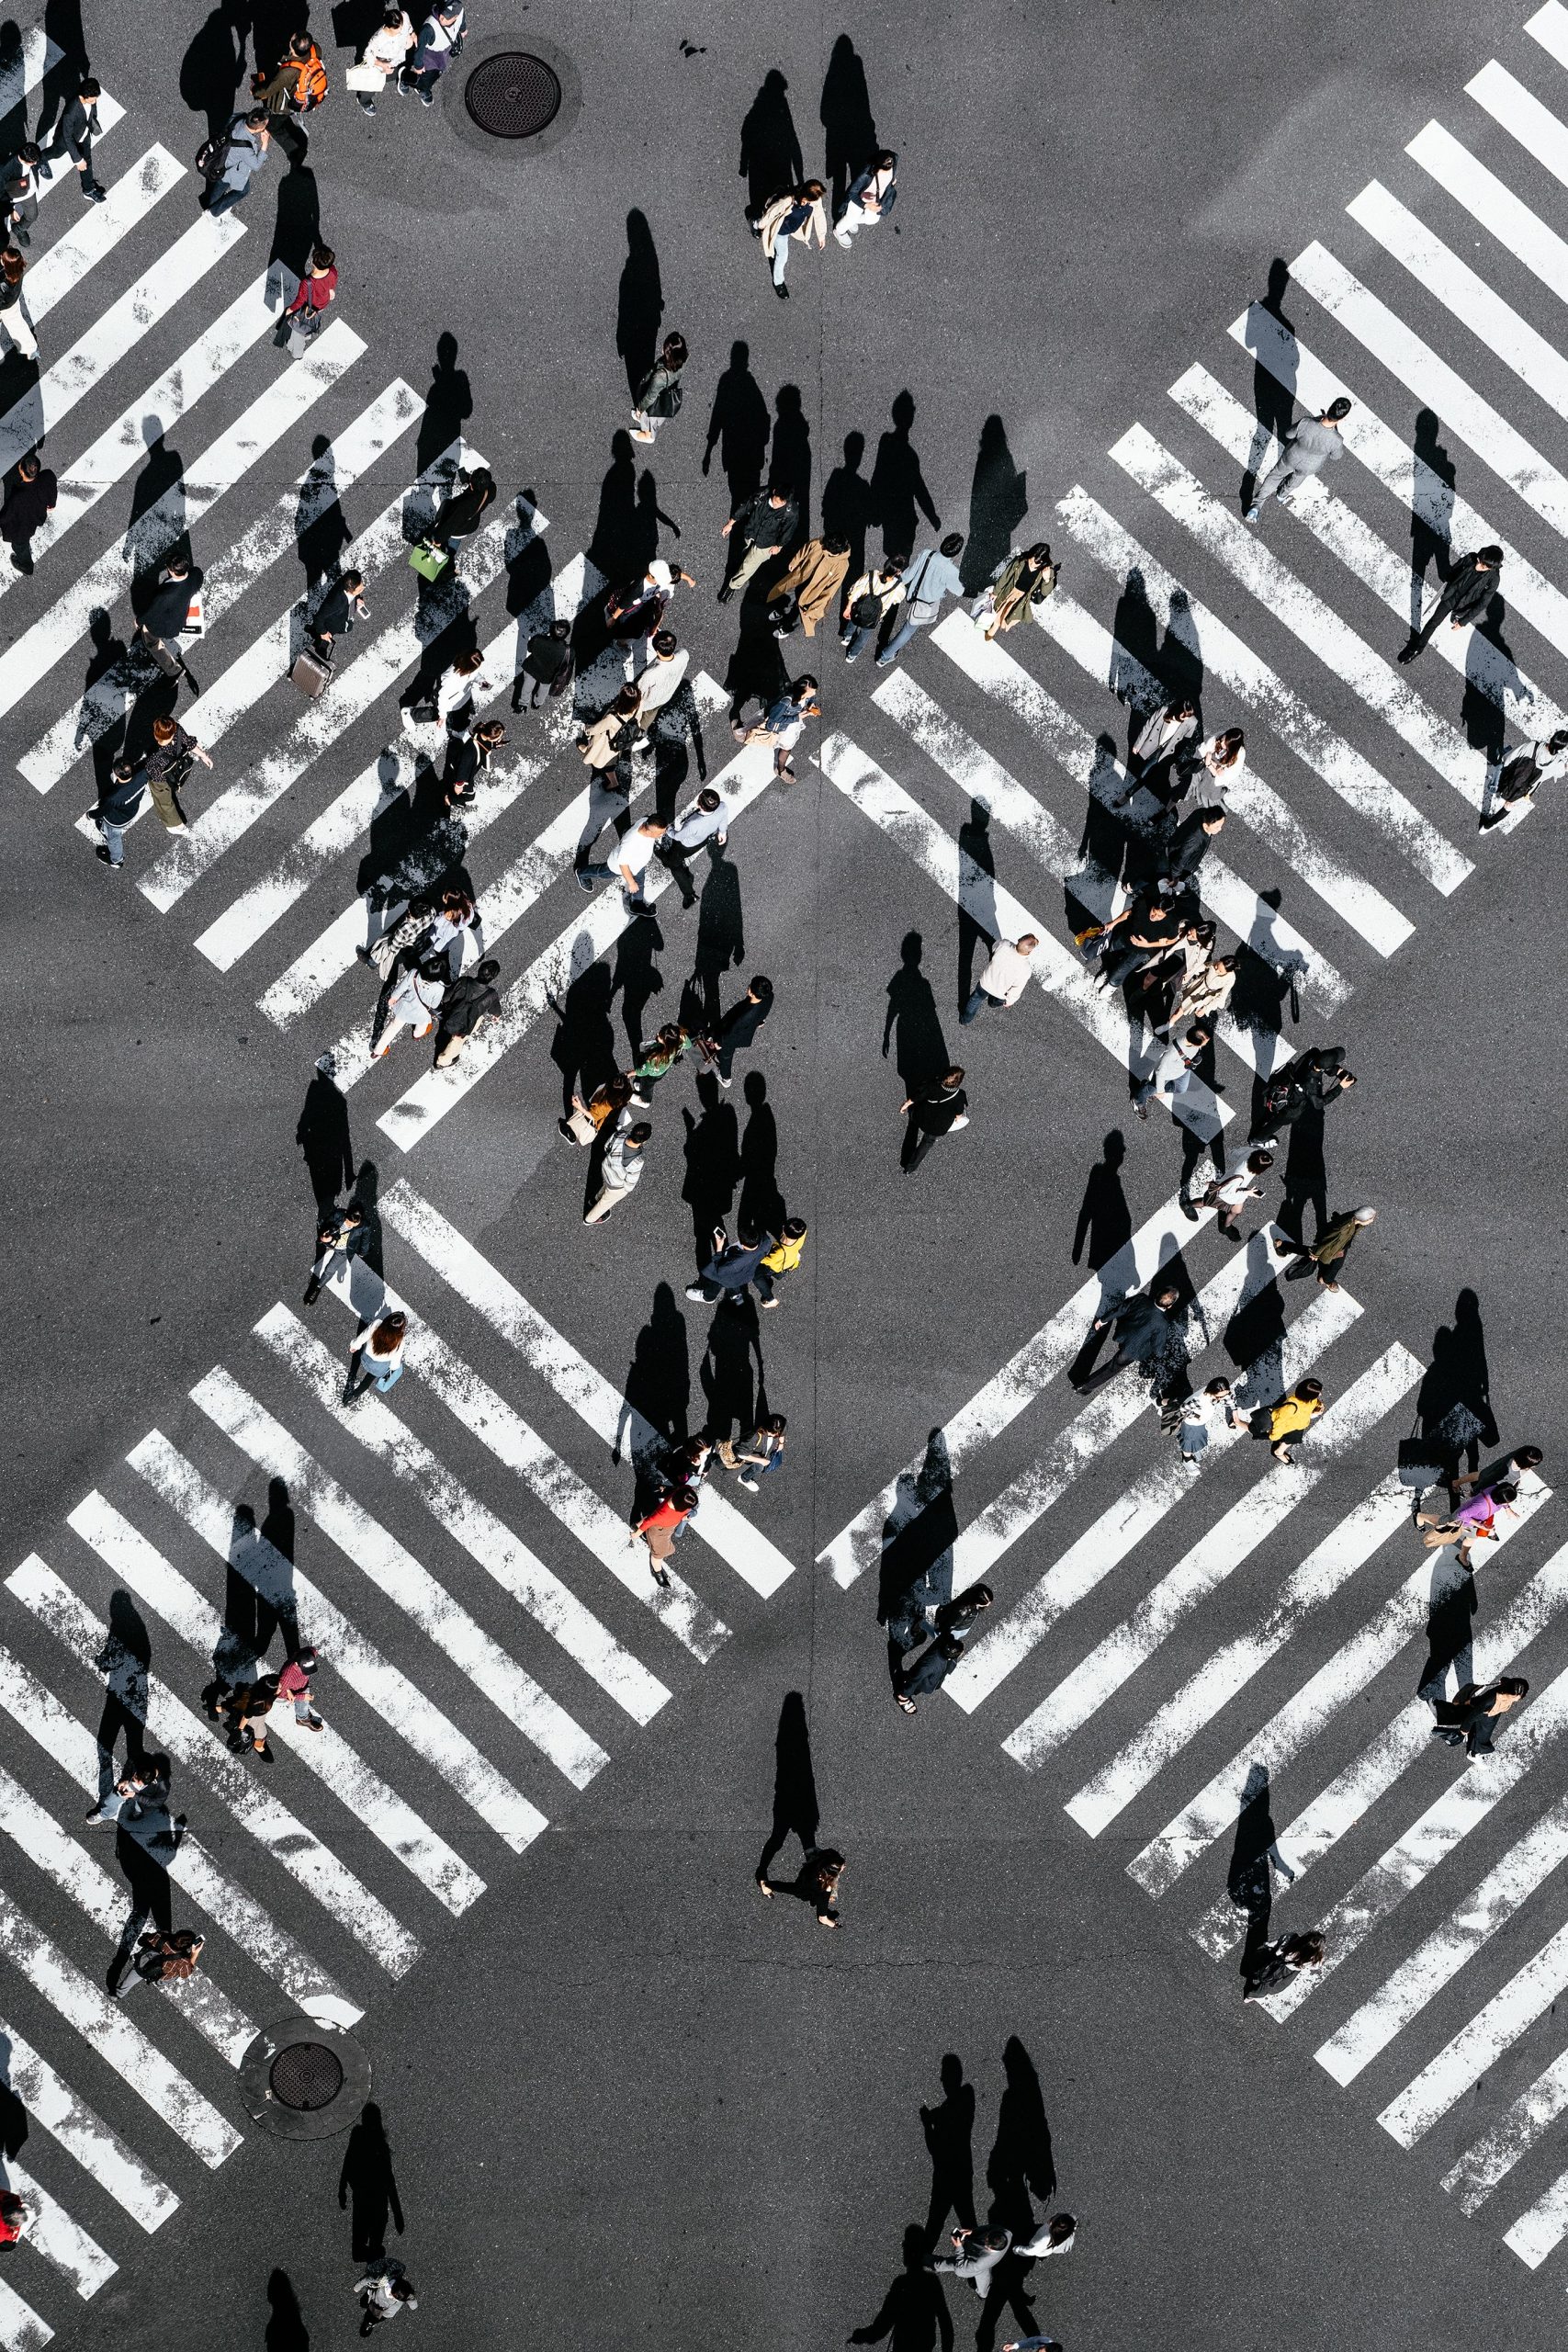 Image shows a busy intersection in a crowded city with several people crossing the street simultaneously